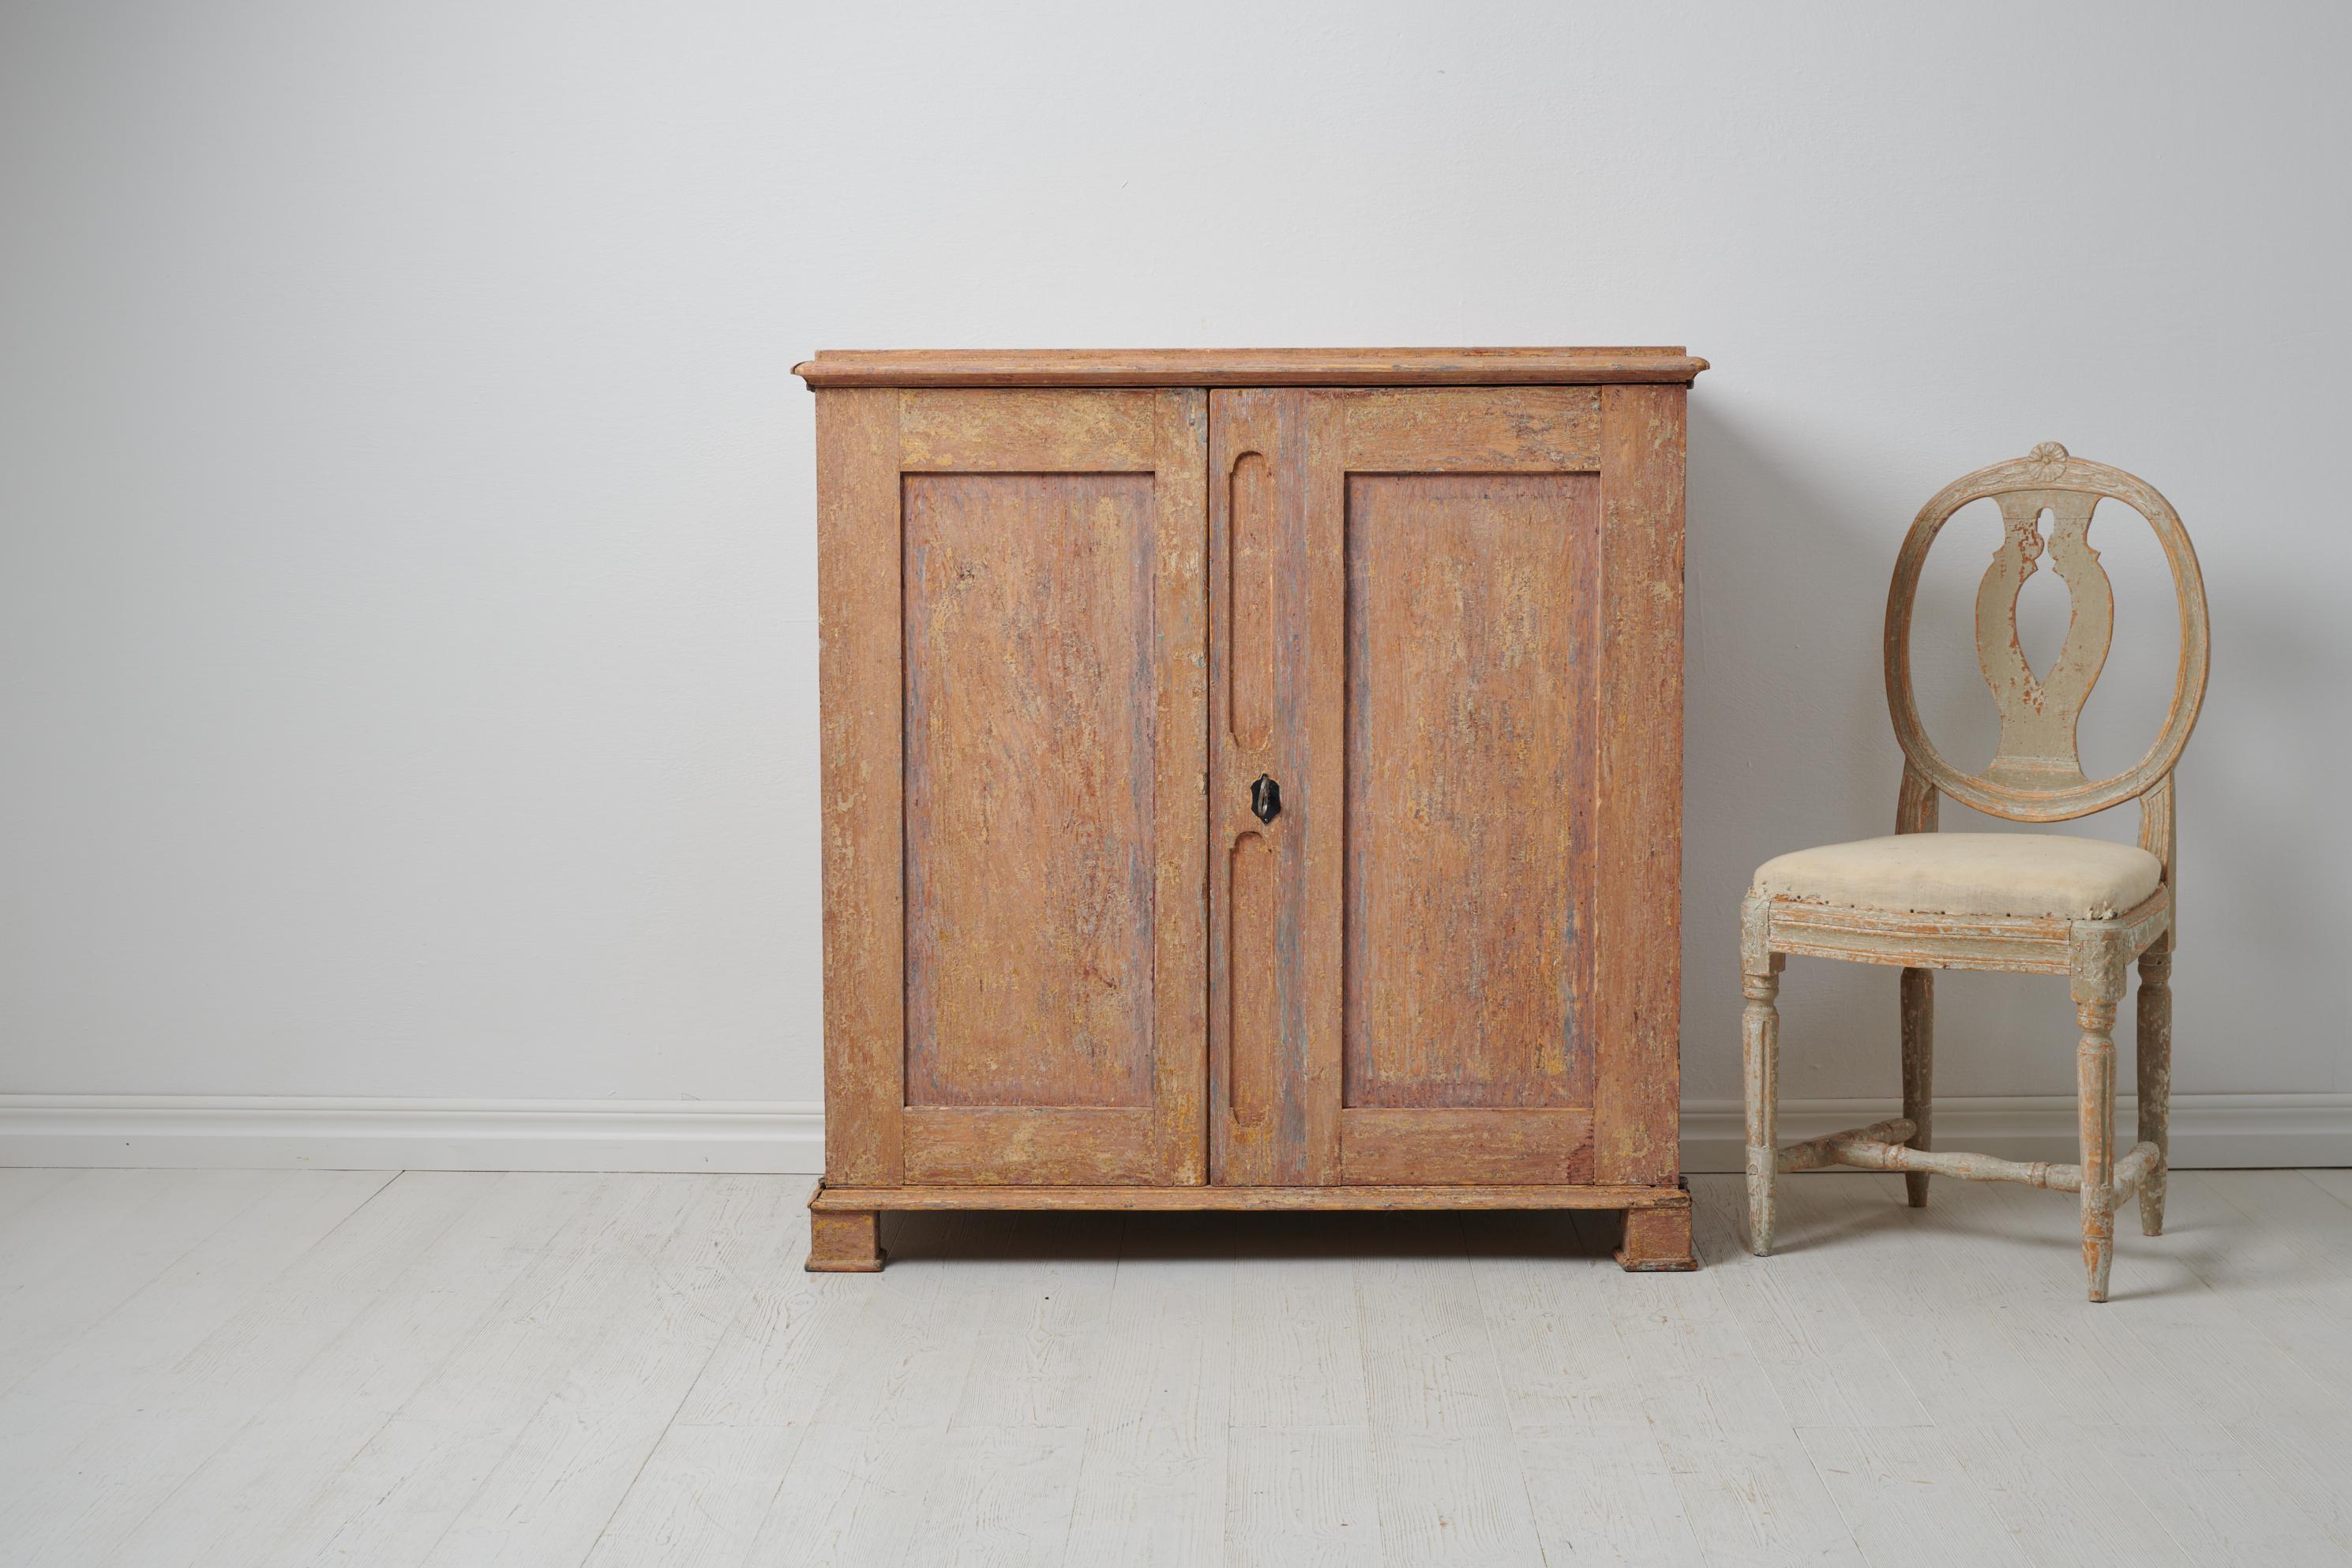 Antique Swedish country sideboard from around 1830. The sideboard is an authentic Swedish country furniture made in painted pine. It has been dry scraped by hand down to the first layer of original paint. The surface is rustic as a result with a